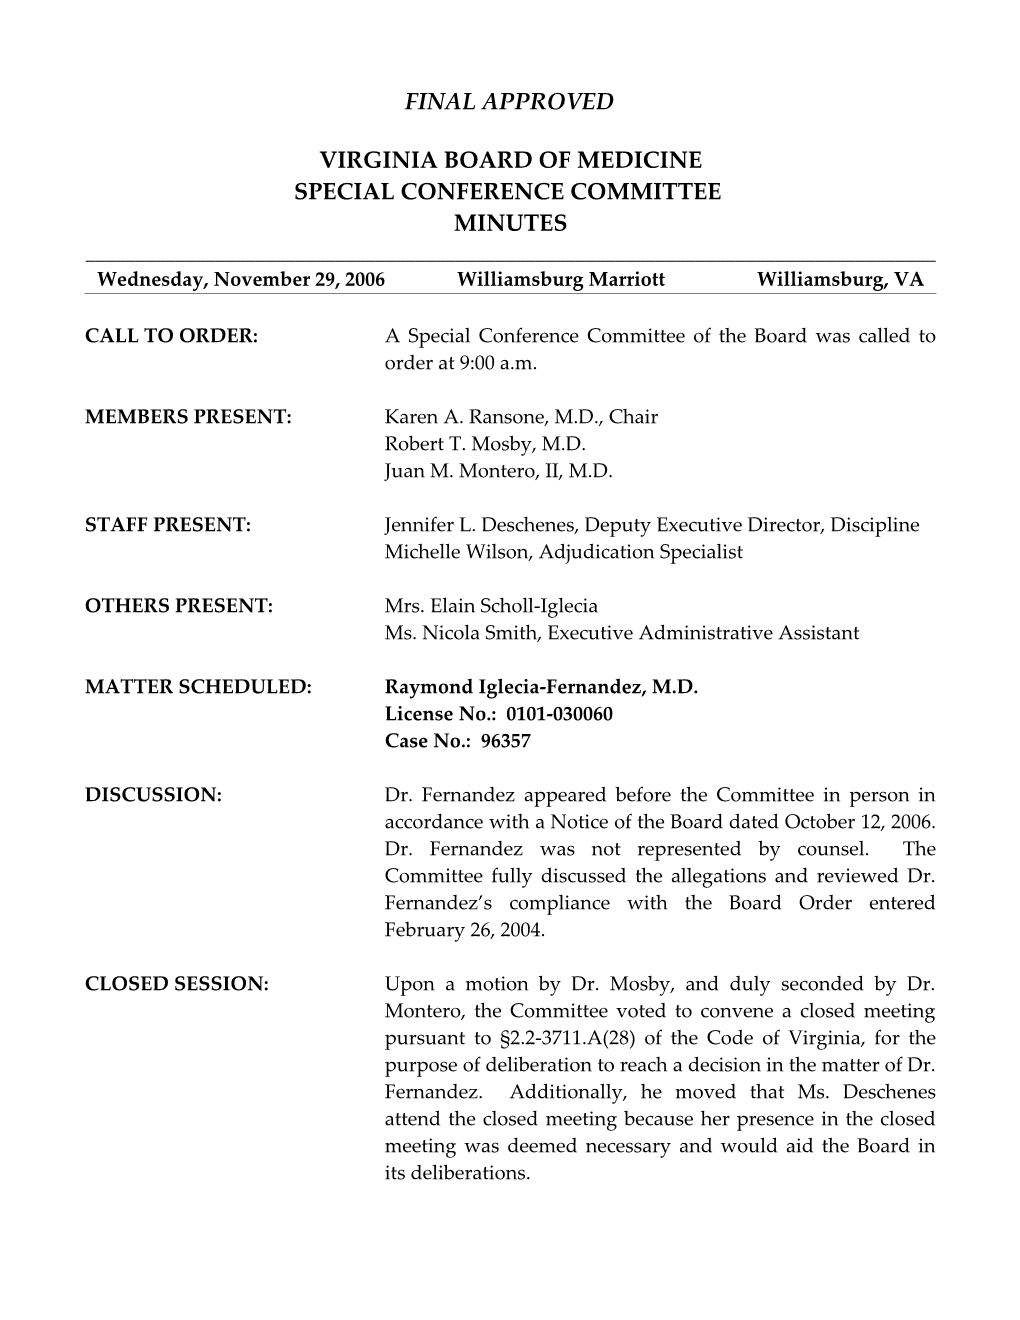 Final Minutes - Special Conference Committee - November 29, 2006